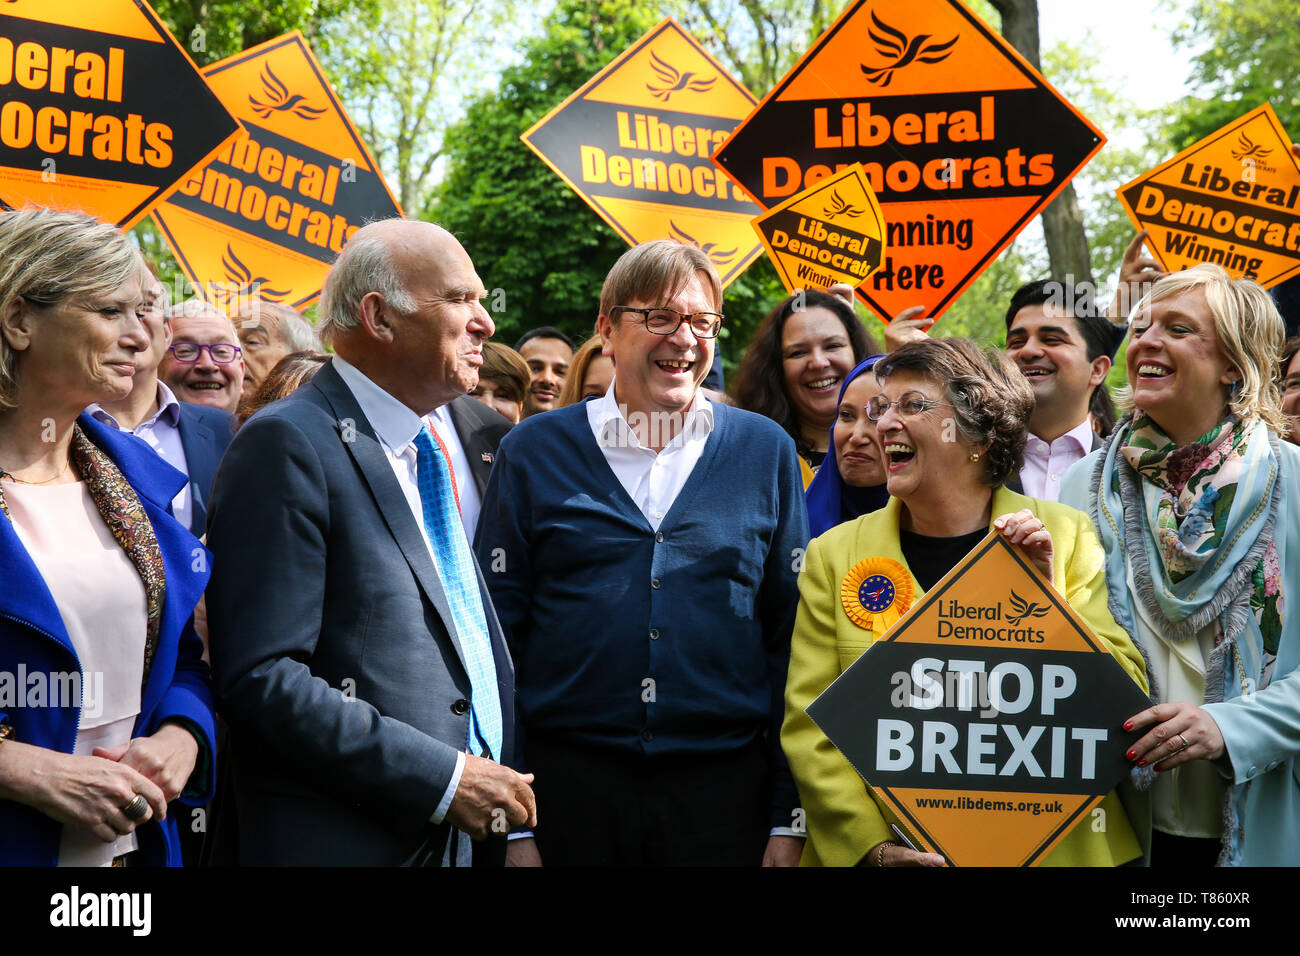 Guy Verhofstadt, the EU Parliament’s representative on Brexit and the Leader of the Alliance of Liberals and Democrats for Europe is seen with the leader of Liberal Democrats Vince Cable, Liberal Democrats MEP candidates and party activists during the forthcoming European Union election campaign. Britain must hold European Parliament elections on 23rd May 2019 or leave the European Union with no deal on 1st June after Brexit was delayed until 31st October 2019, as Prime Minister, Theresa May failed to get her Brexit deal approved by Parliament. Stock Photo